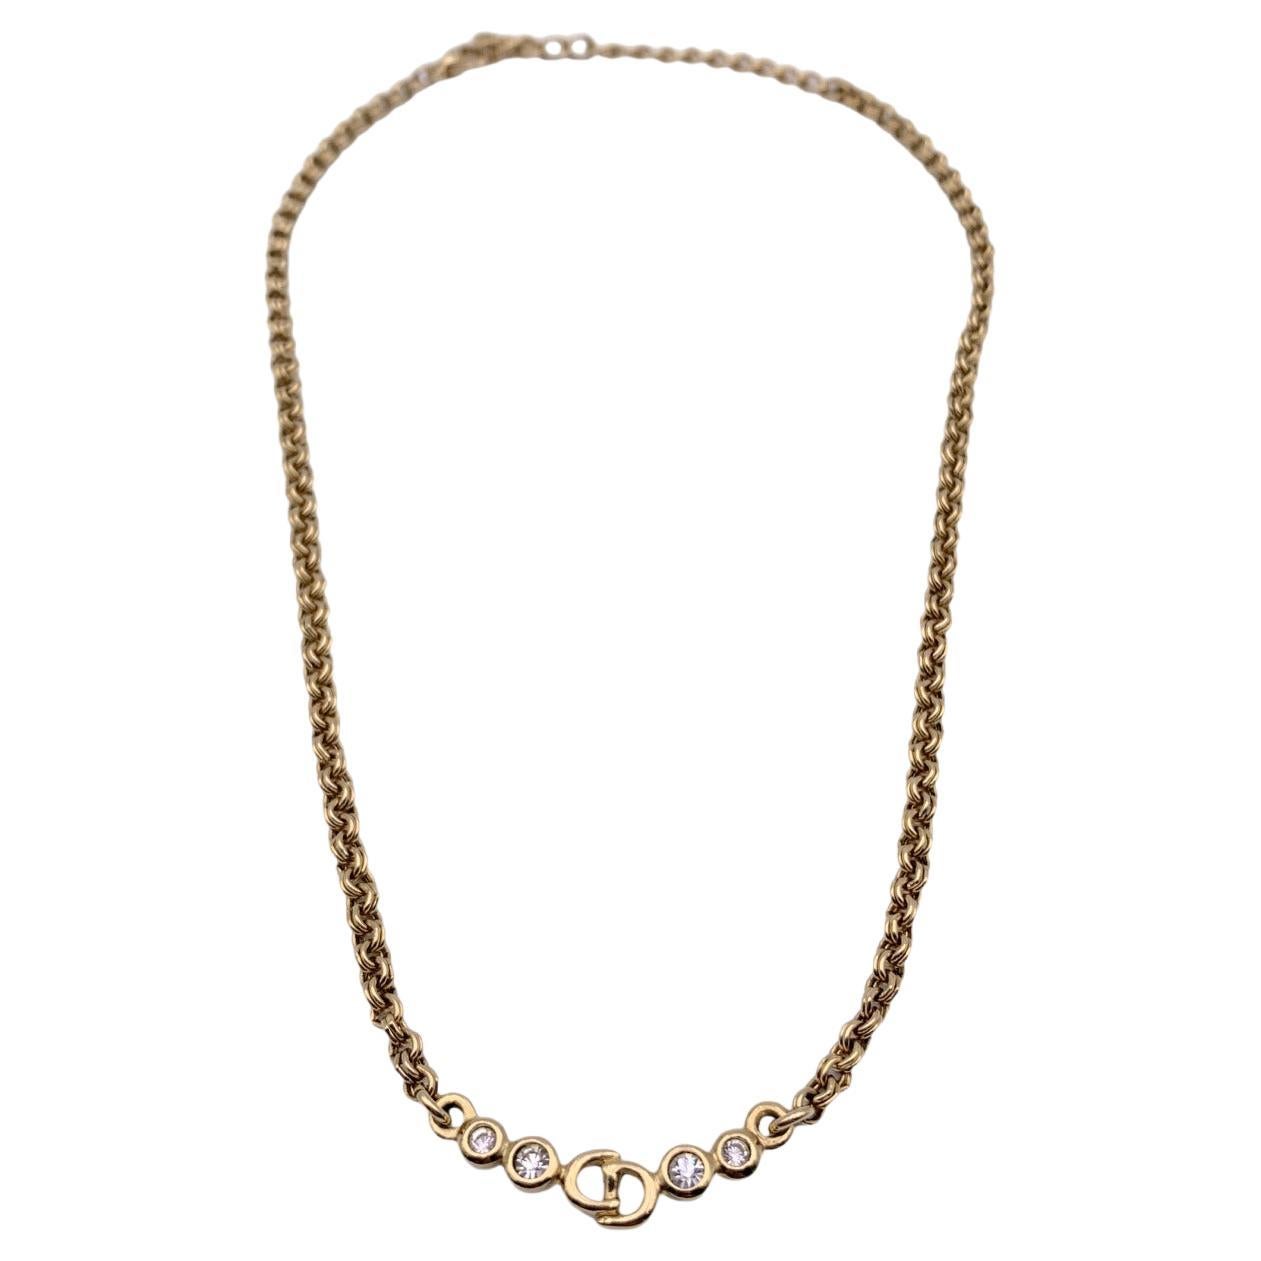 LAST LIGHT CHAIN NECKLACE (18K GOLD PLATED) – KIRSTIN ASH (United States)